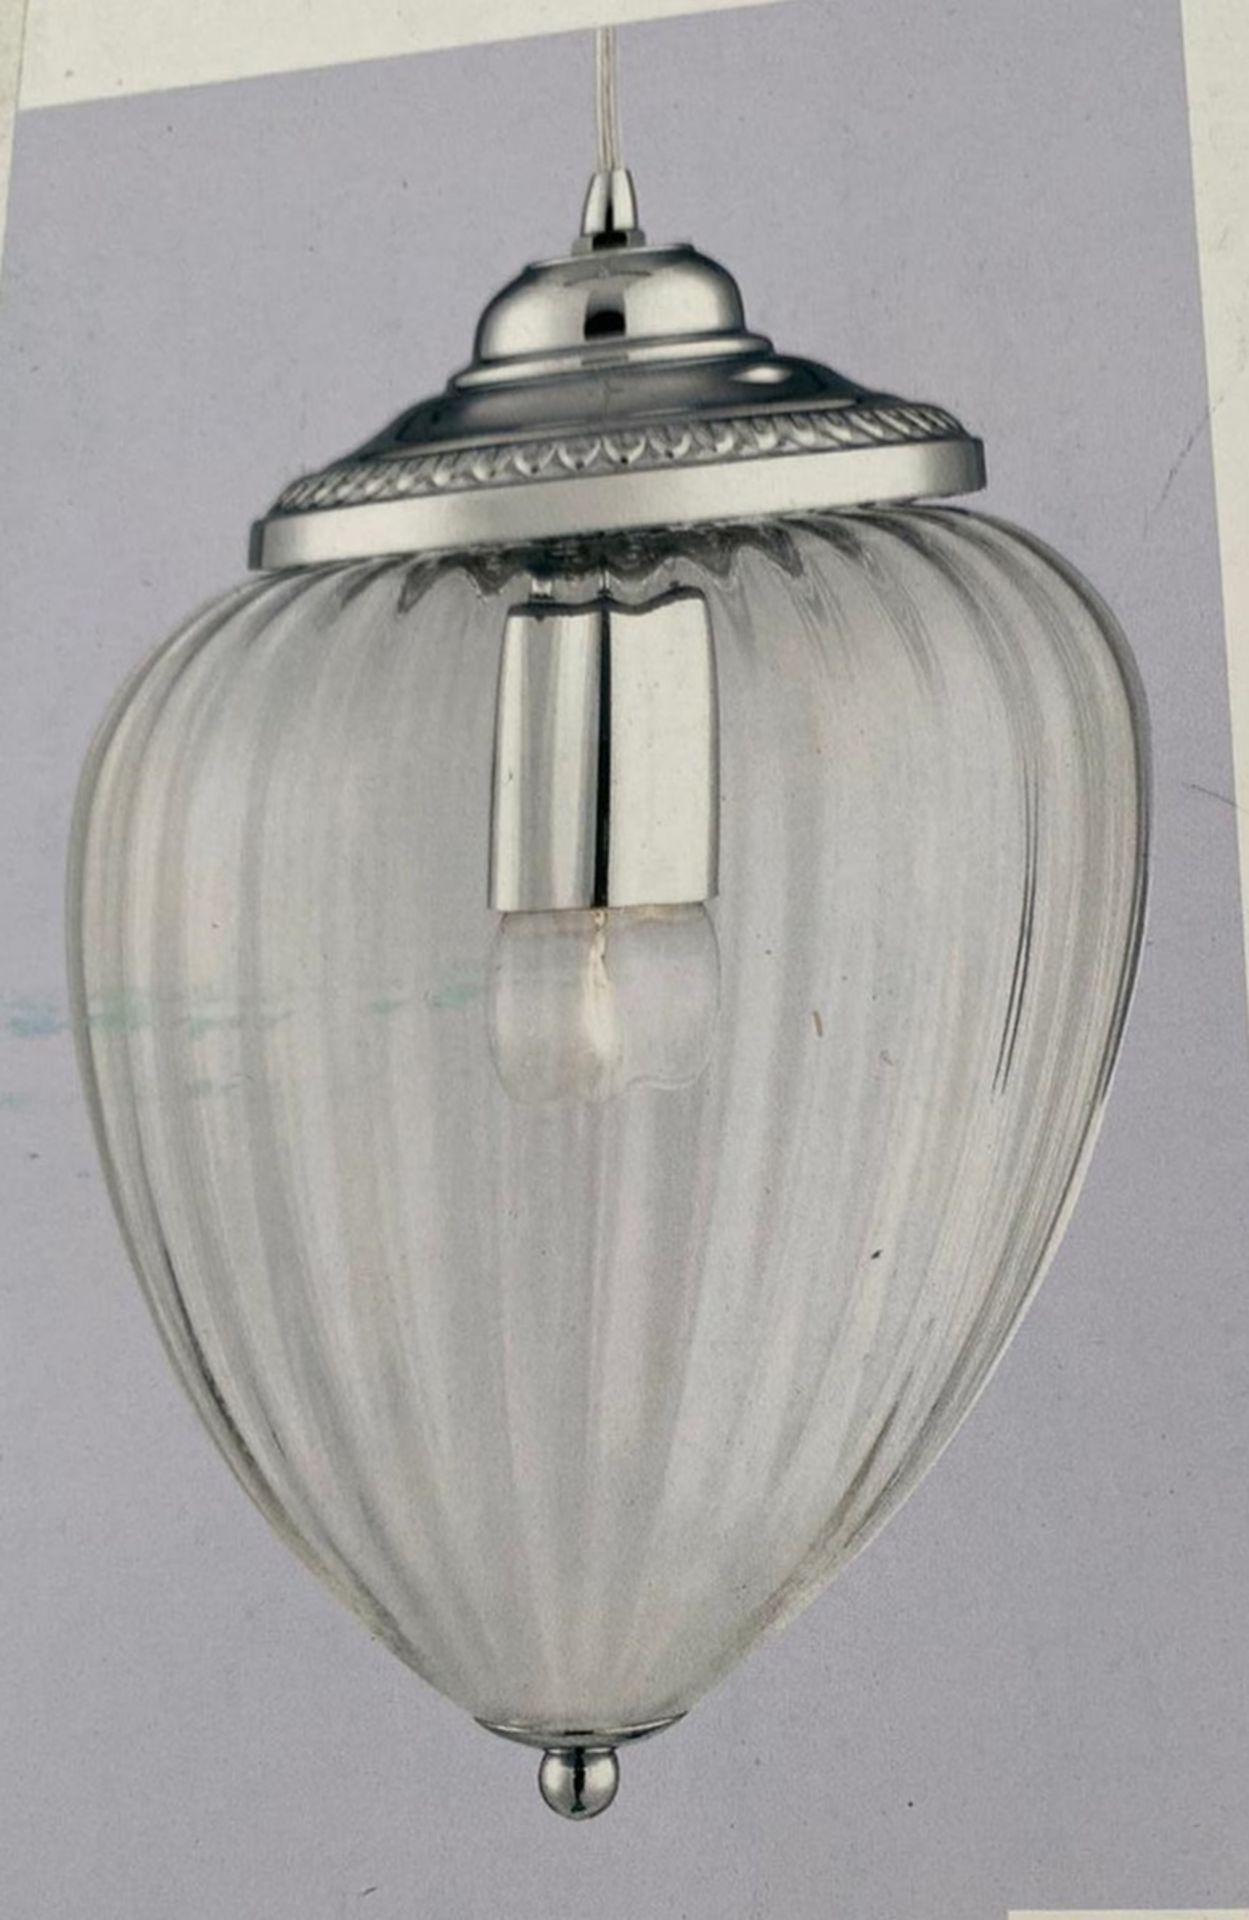 1 x Searchlight Pendant in a chrome finish - Ref: 1091CC - New and Boxed - RRP: £25 - Image 2 of 4